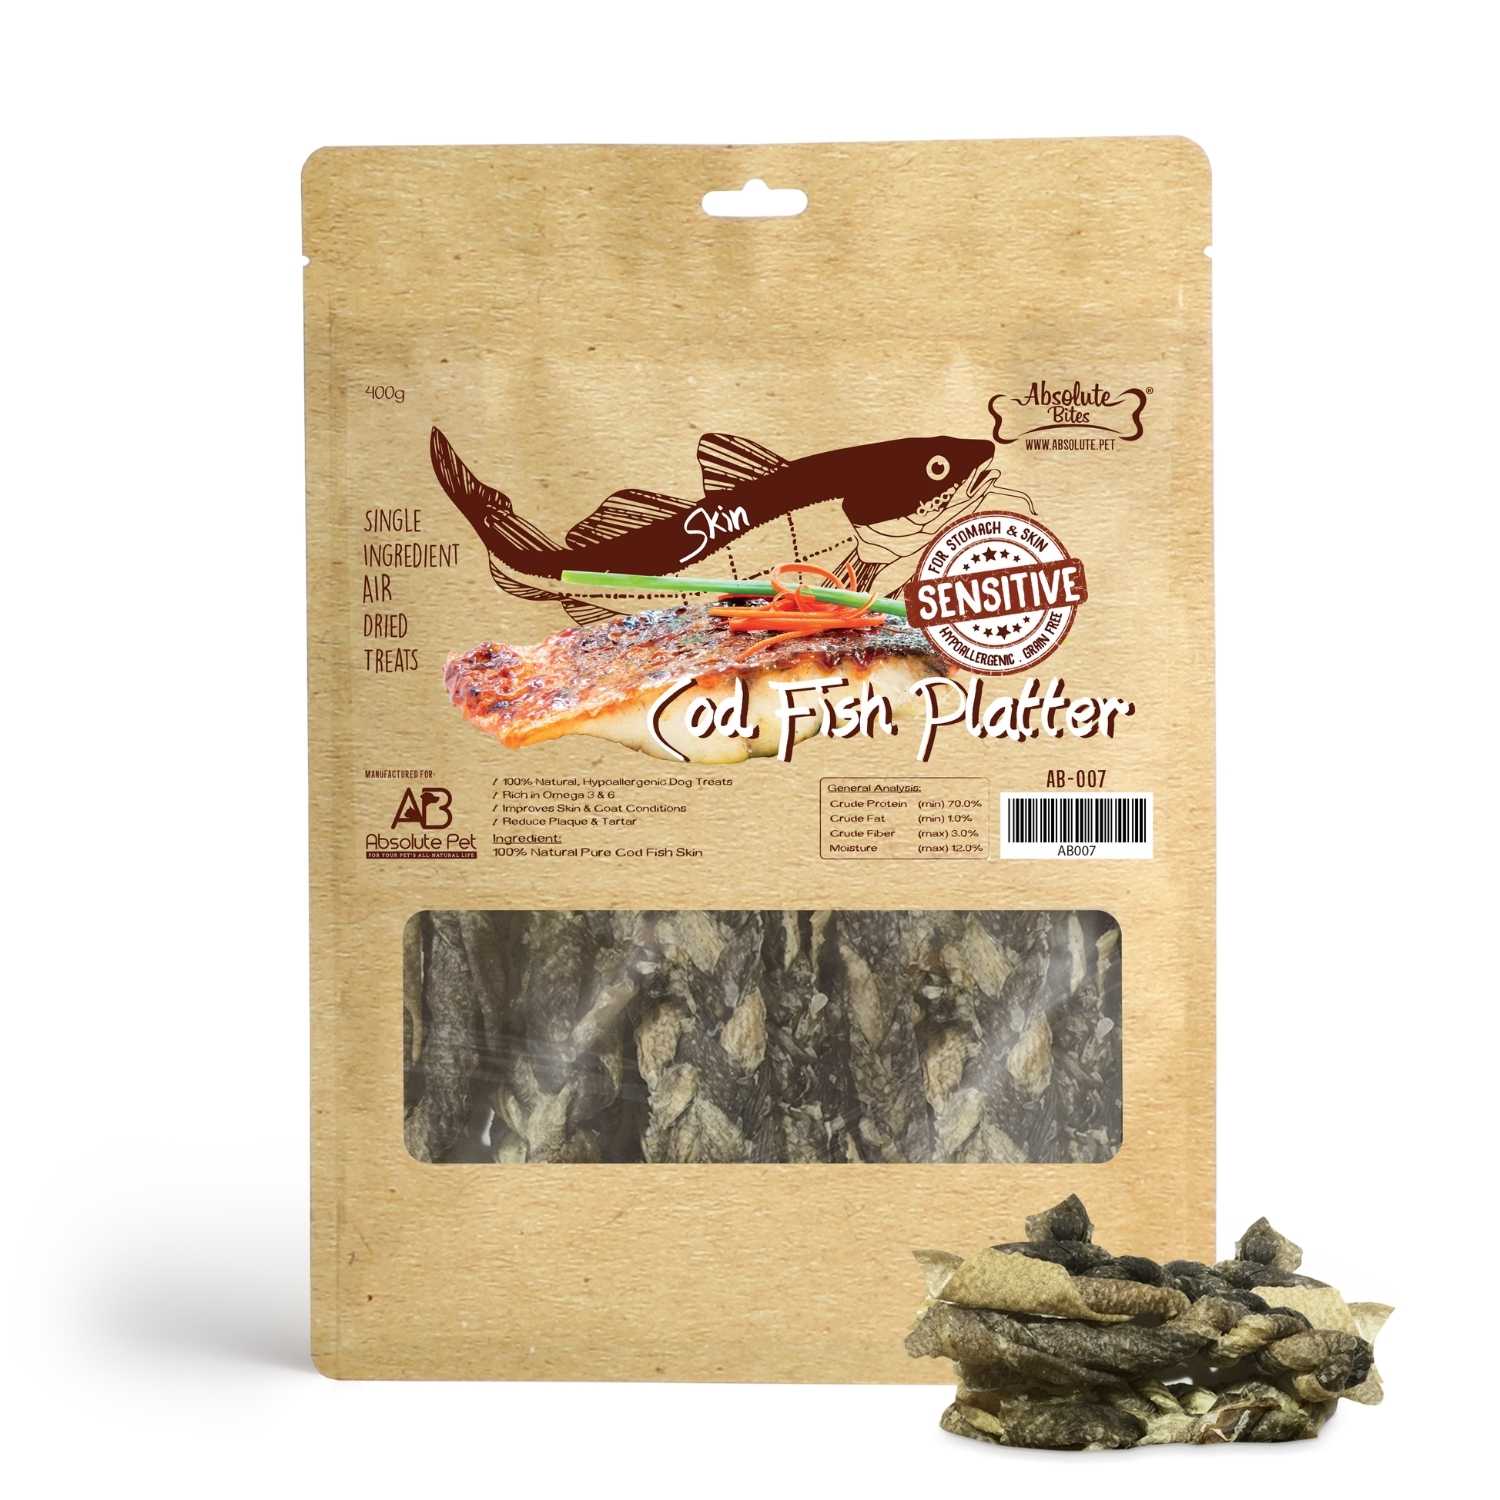 Absolute Bites - Air Dried Cod Fish Platter for Dogs 400g